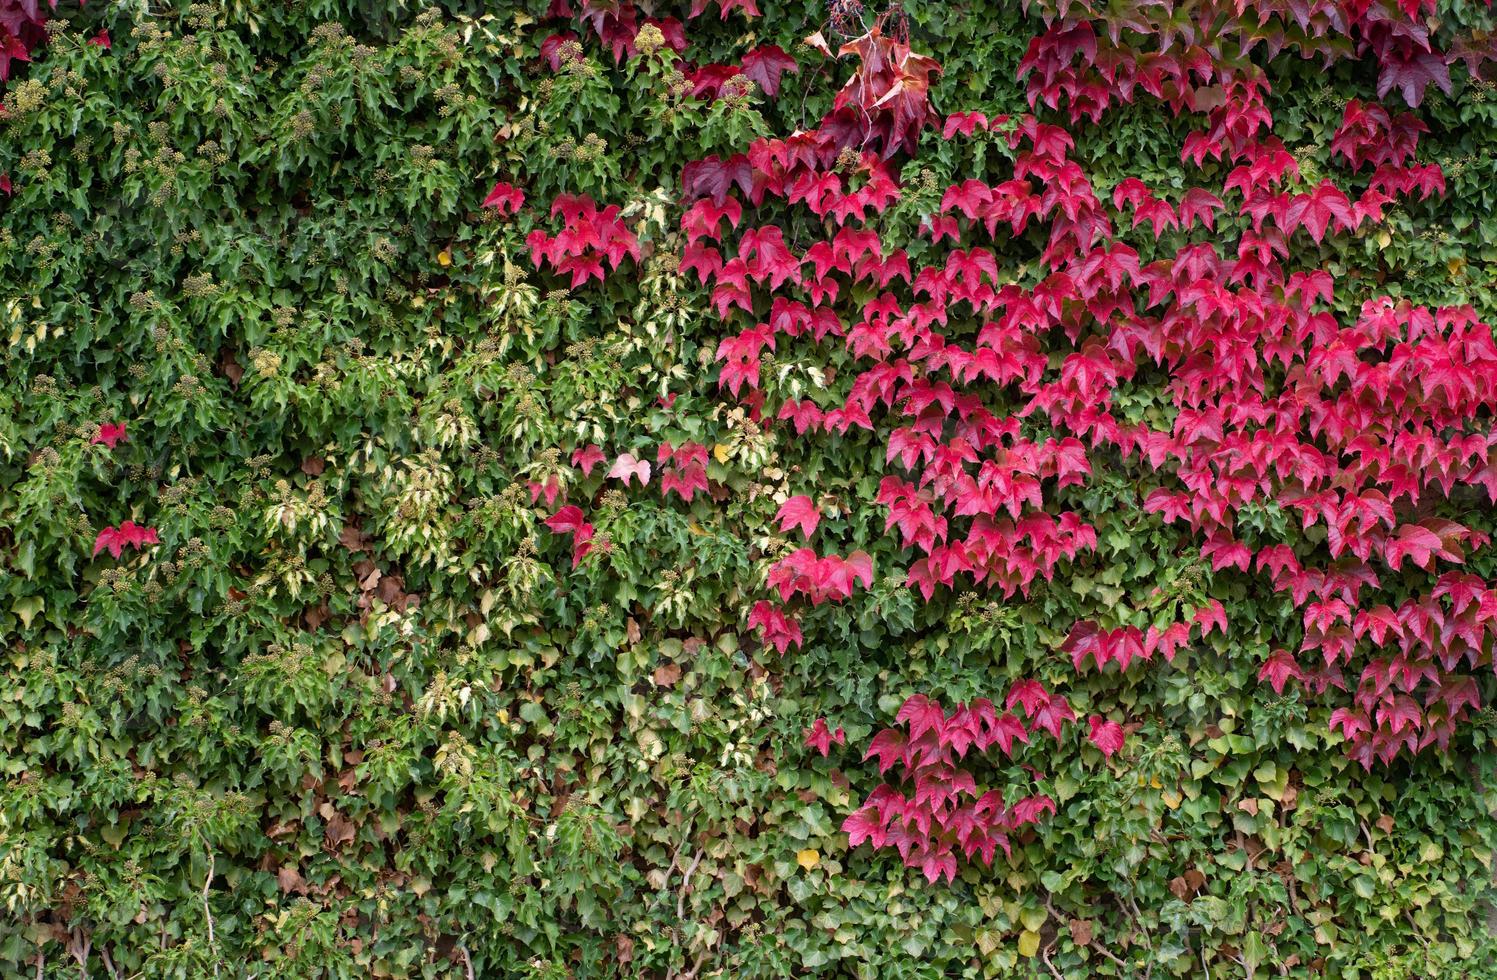 Background and texture of a wall covered with ivy and virginia creeper. The ivy is green. The leaves of the Virginia creeper shine red and form a contrast. photo